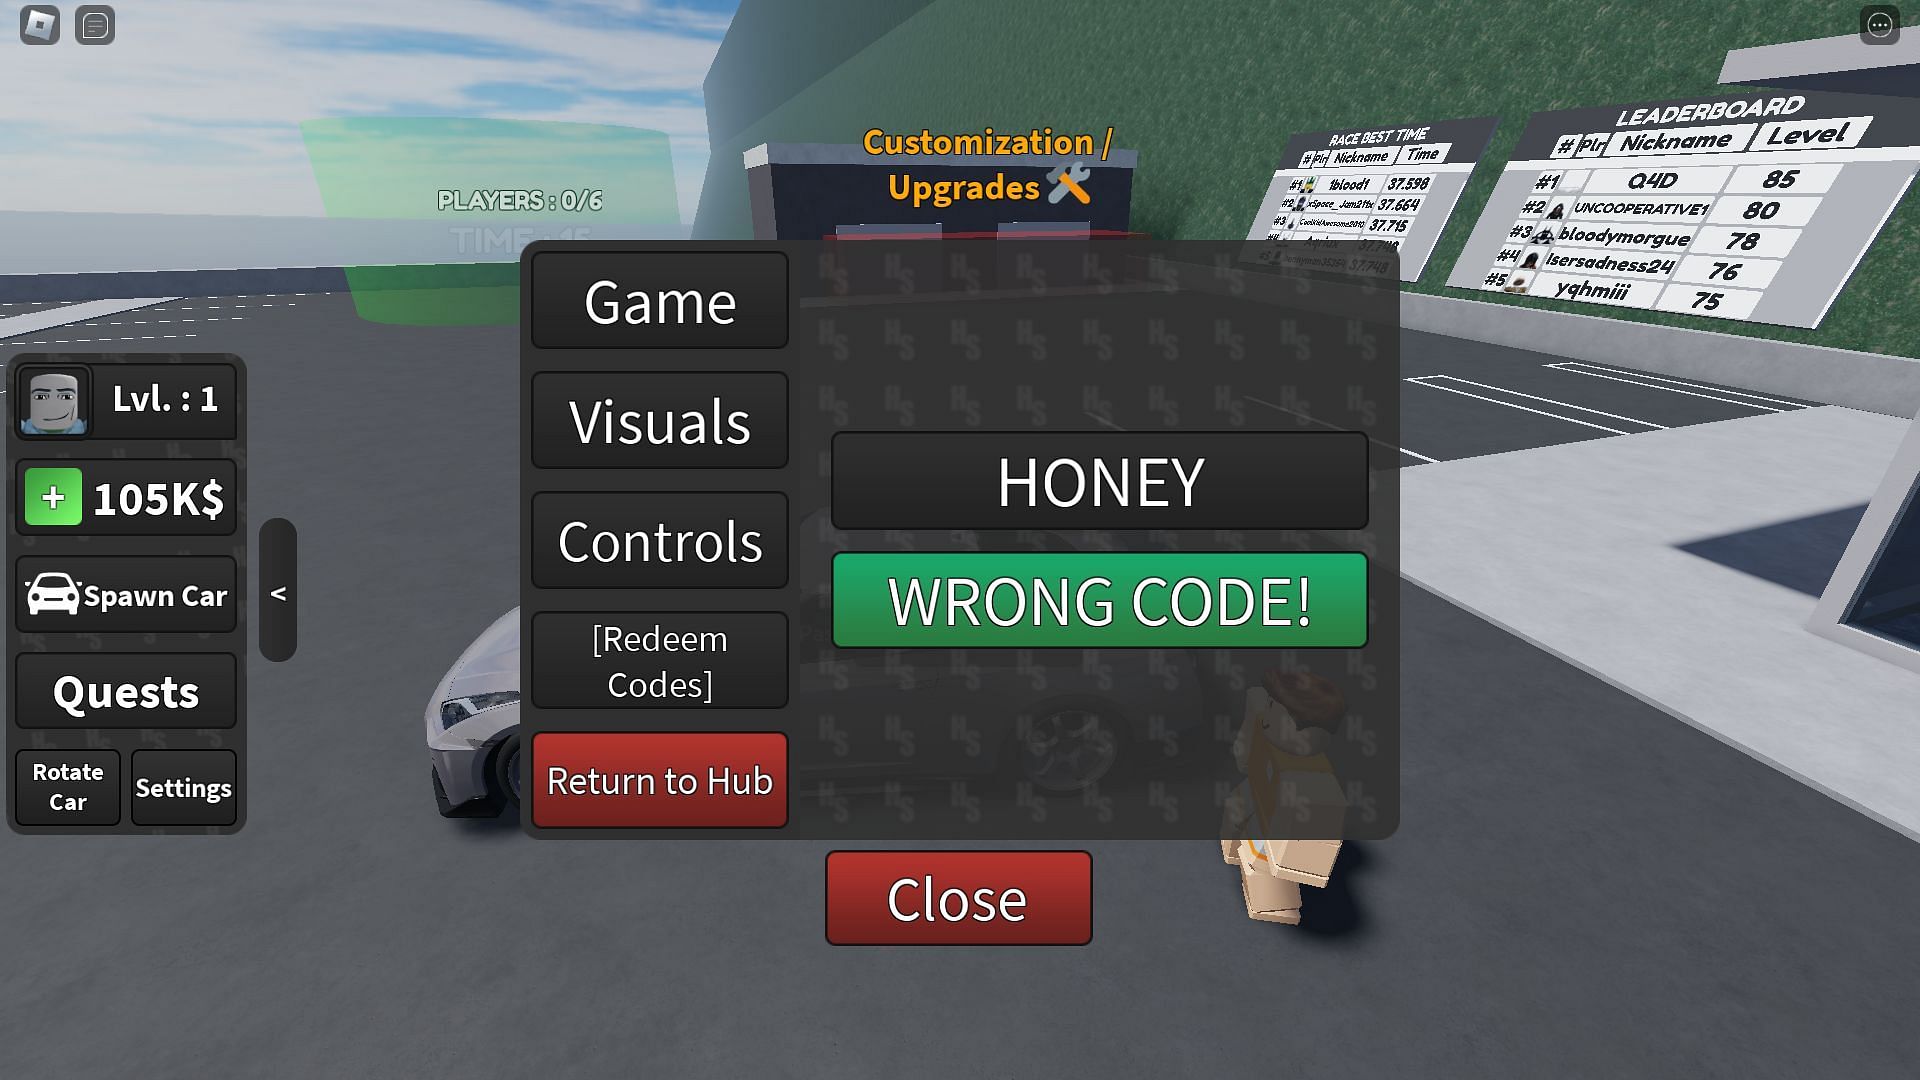 Troubleshooting codes for Highway Syndicate (Image via Roblox)